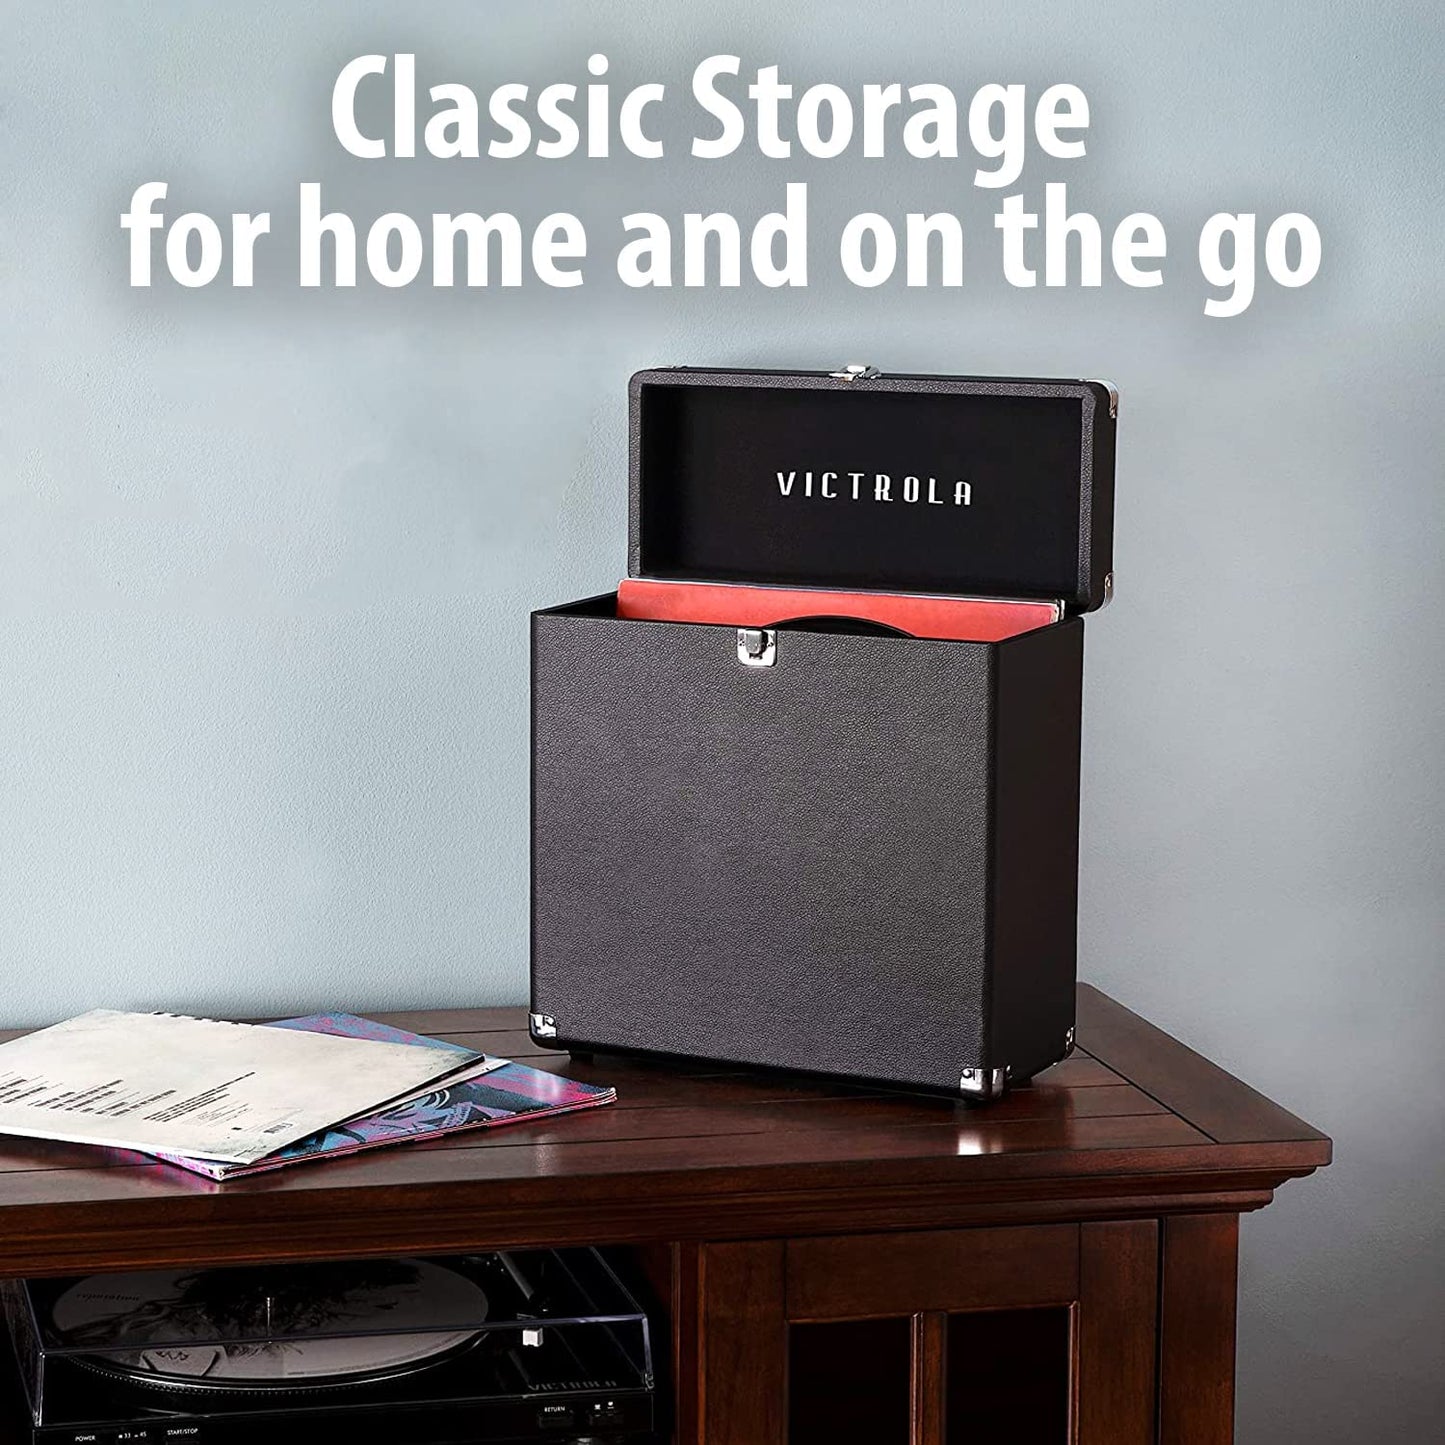 Victrola Vintage Vinyl Record Storage and Carrying Case, Fits all Standard Records - 33 1/3, 45 and 78 RPM, Holds 30 Albums, Perfect for your Treasured Record Collection, Black